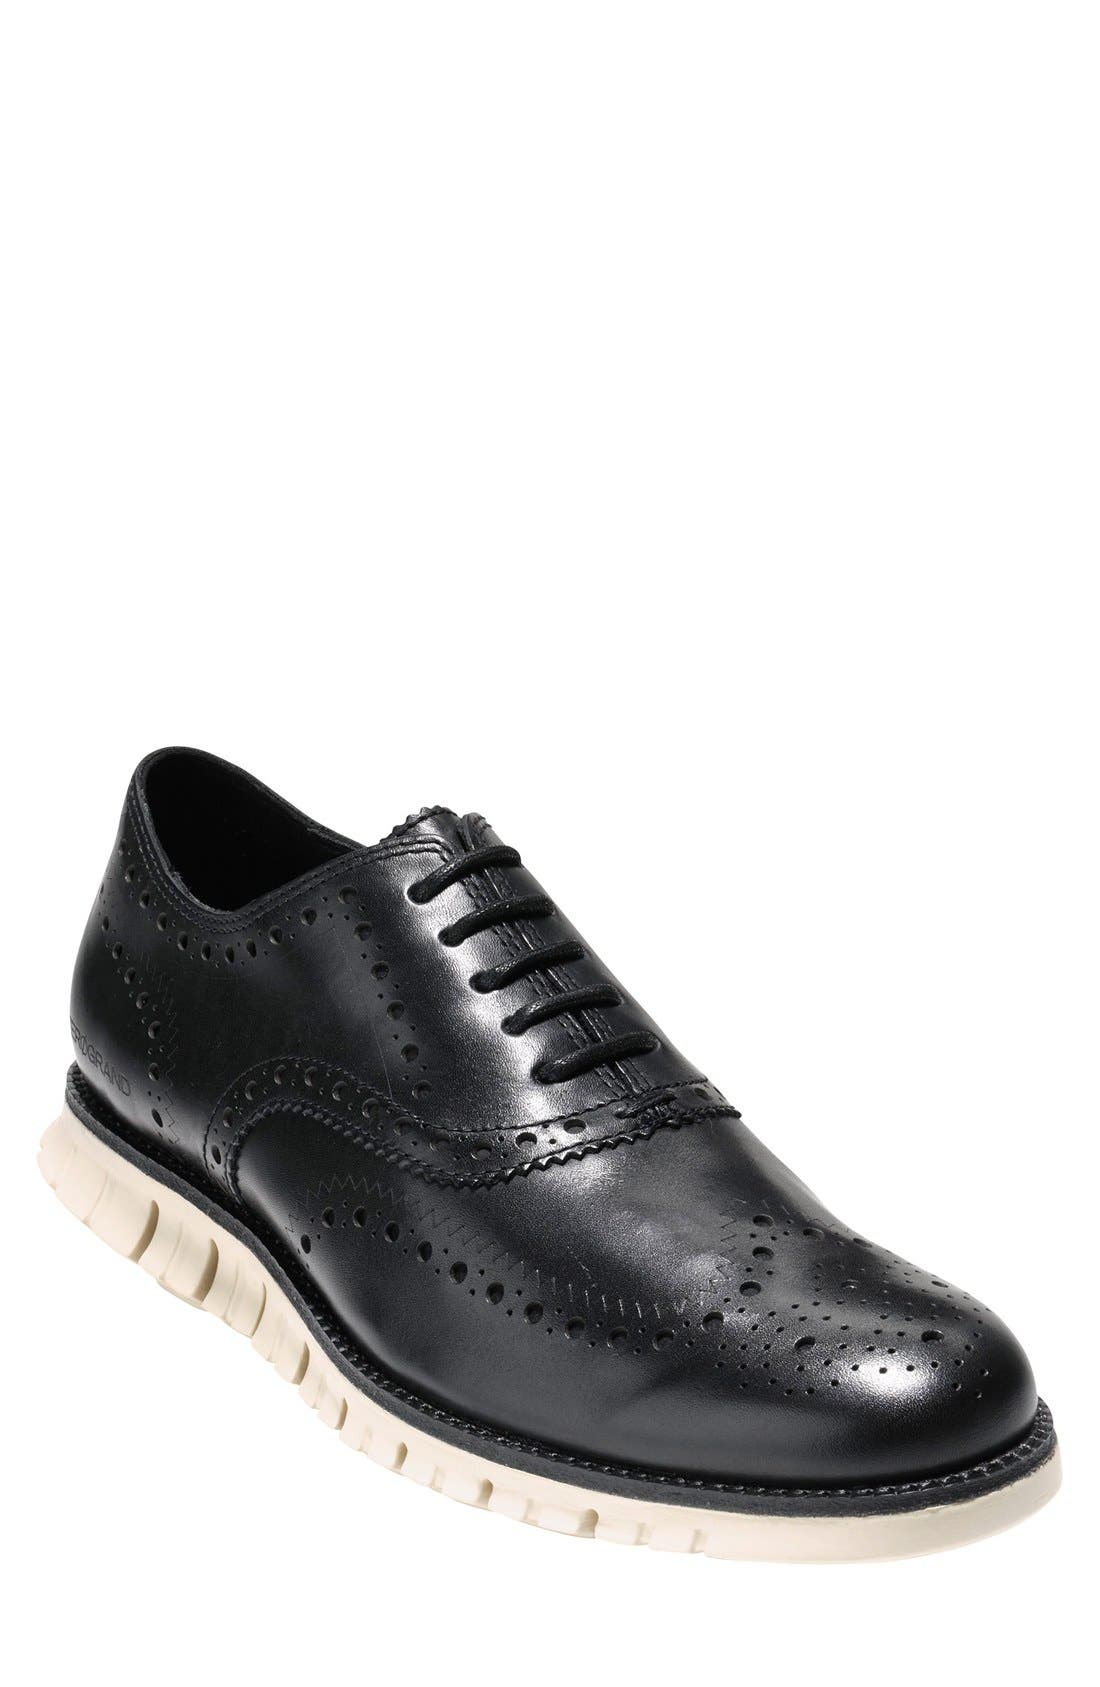 dress shoes with tennis shoe bottoms